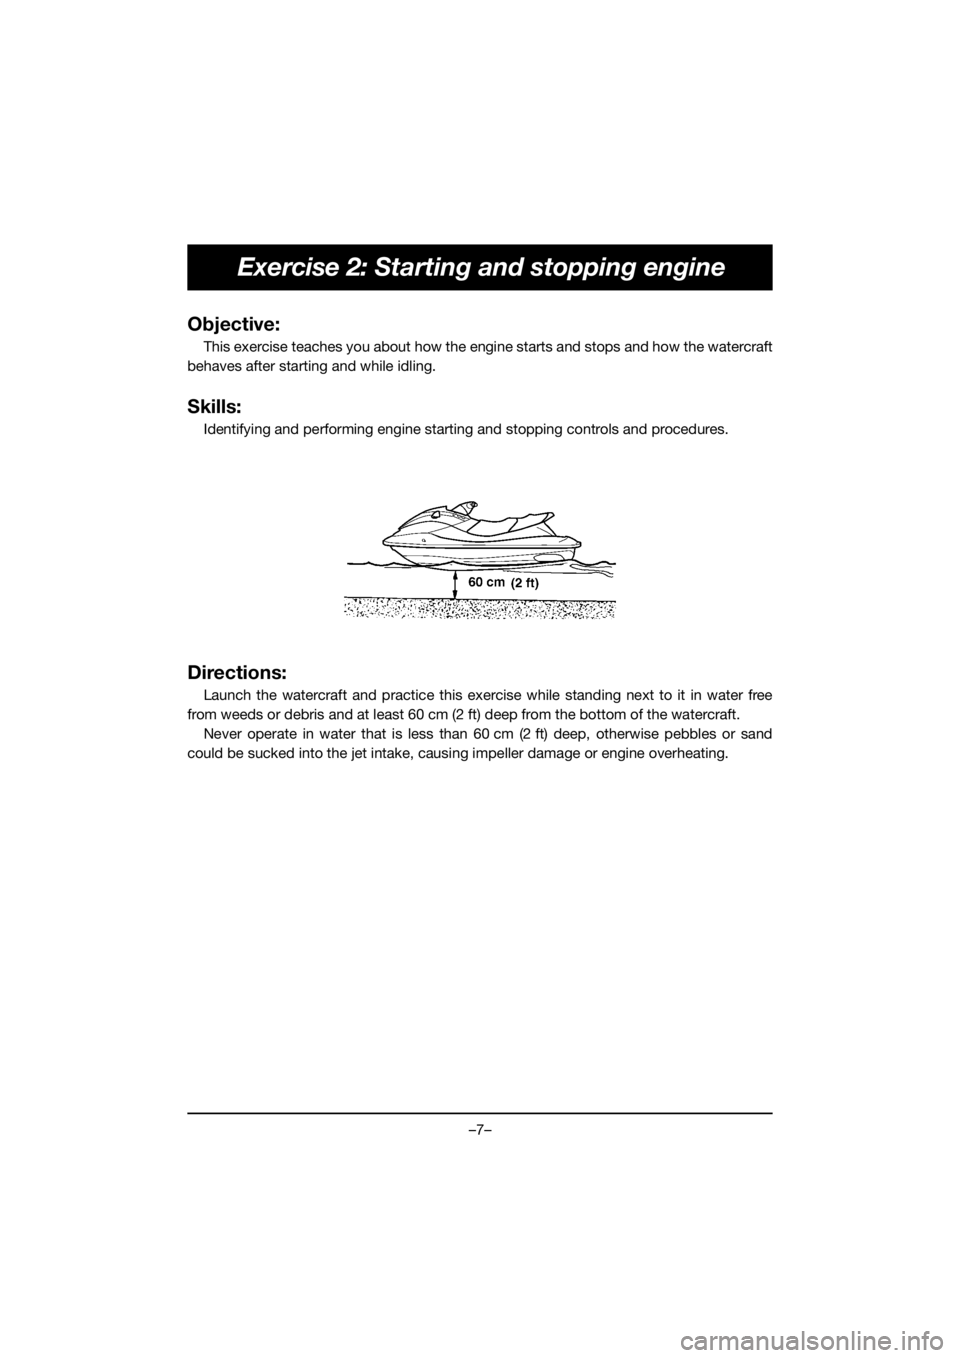 YAMAHA EX 2020 User Guide –7–
Exercise 2: Starting and stopping engine
Objective:
This exercise teaches you about how the engine starts and stops and how the watercraft
behaves after starting and while idling.
Skills:
Iden